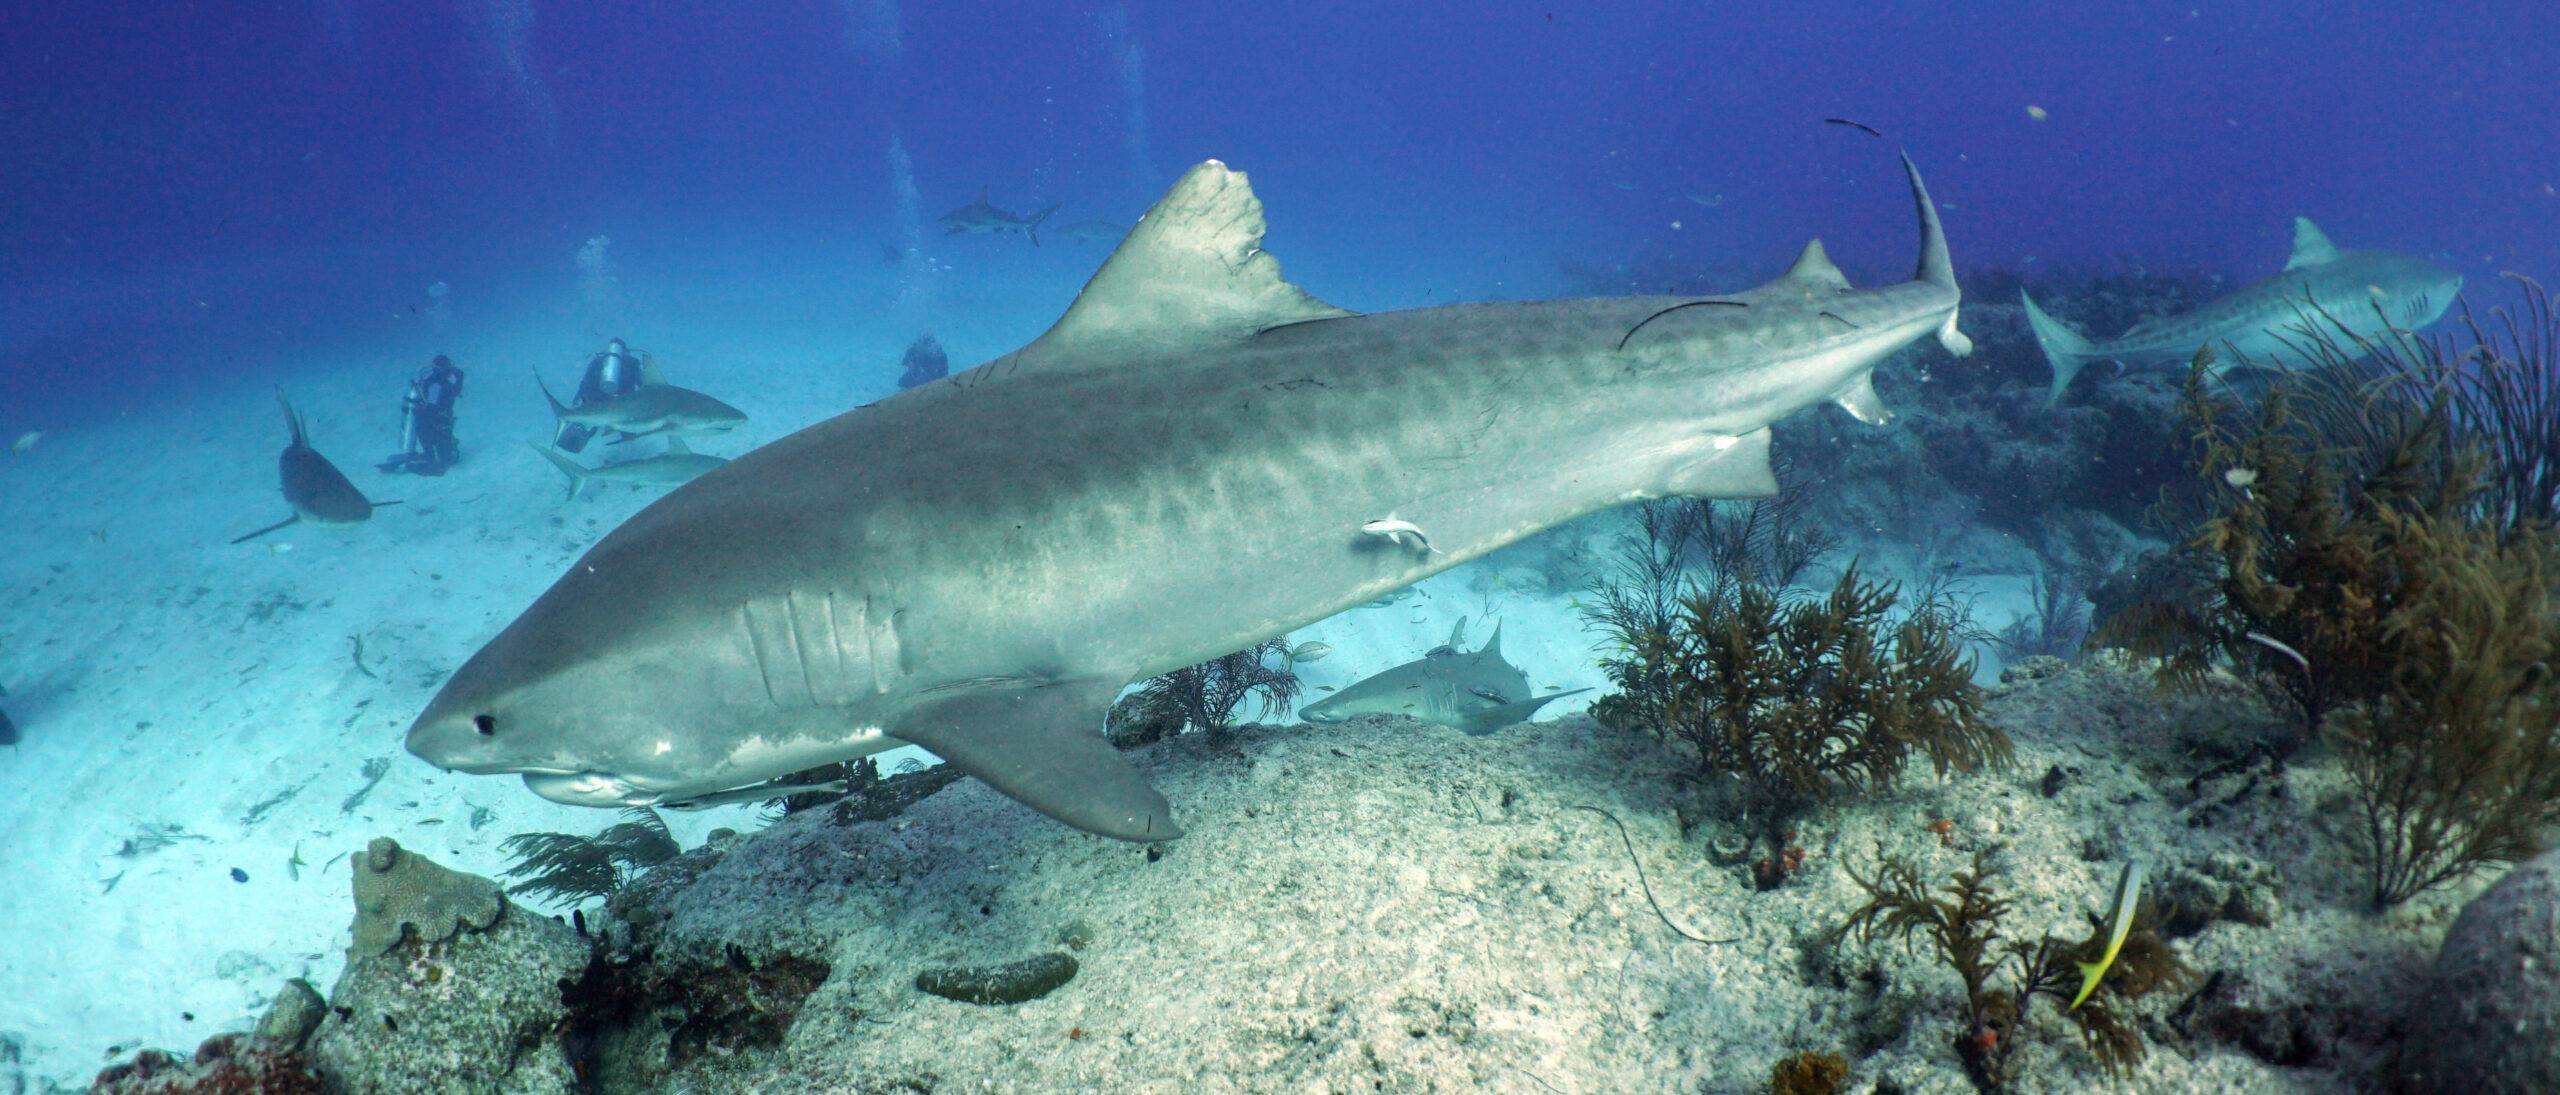 Tiger Shark Season has started for 2023 for our Shark Tour